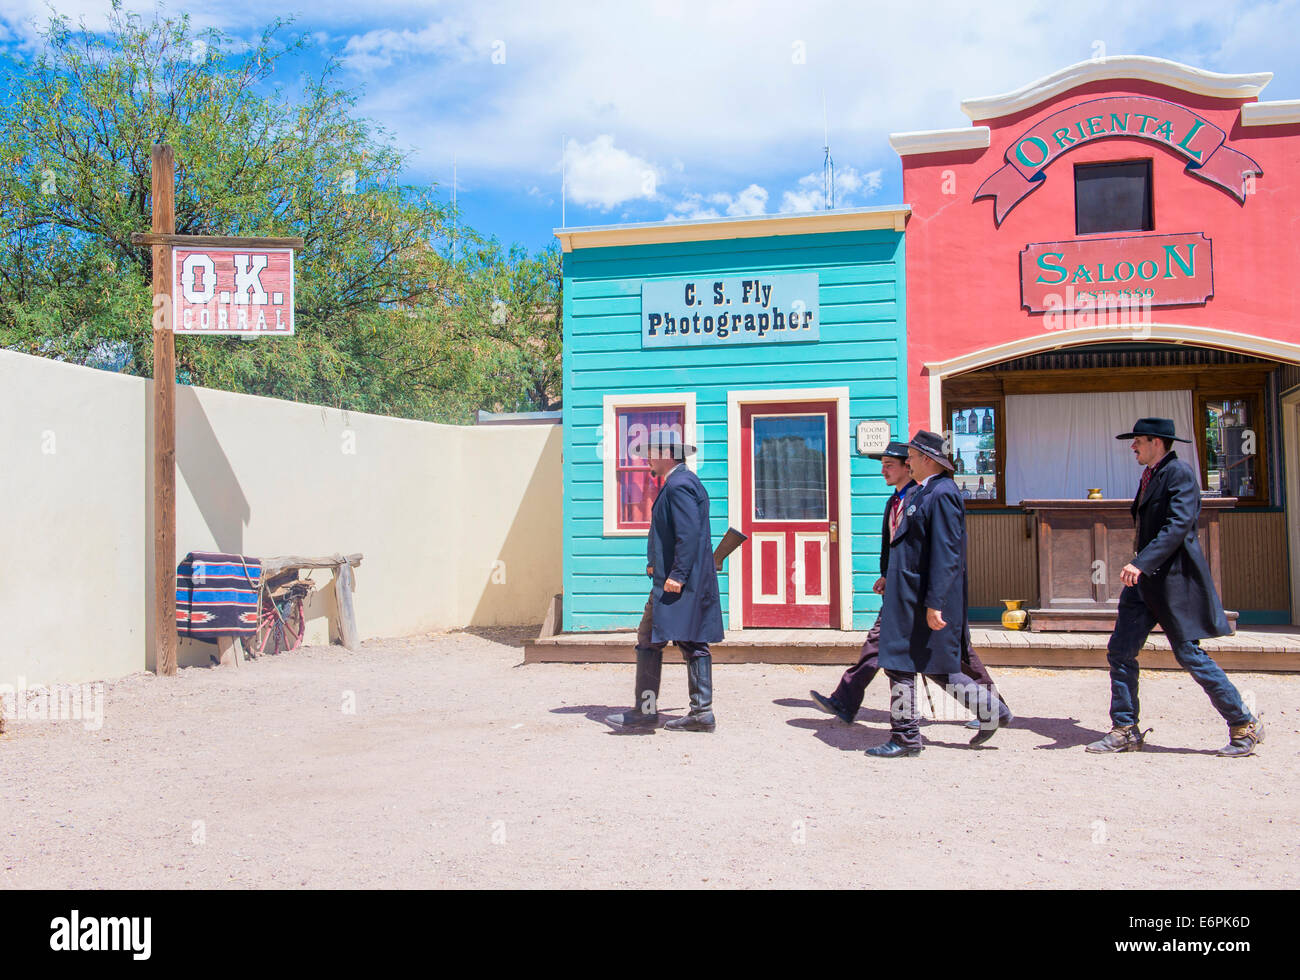 Actors takes part in the Re-enactment of the OK Corral gunfight in Tombstone , Arizona Stock Photo